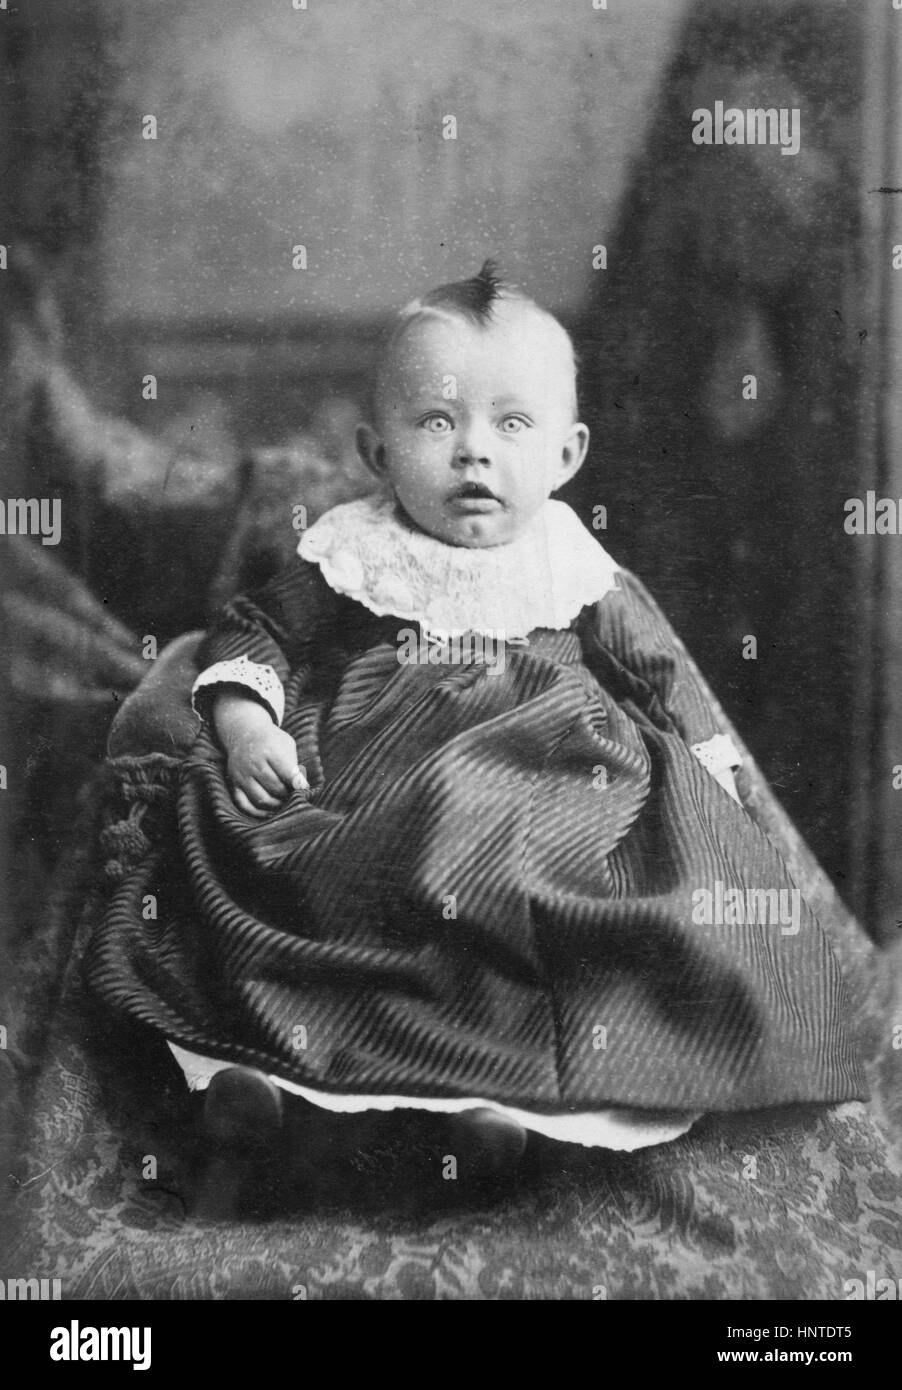 Startled Baby with Kewpie doll hairstyle and doily collar. 1880s.   To see my other child-related vintage images, Search:  Prestor  vintage  kids Stock Photo